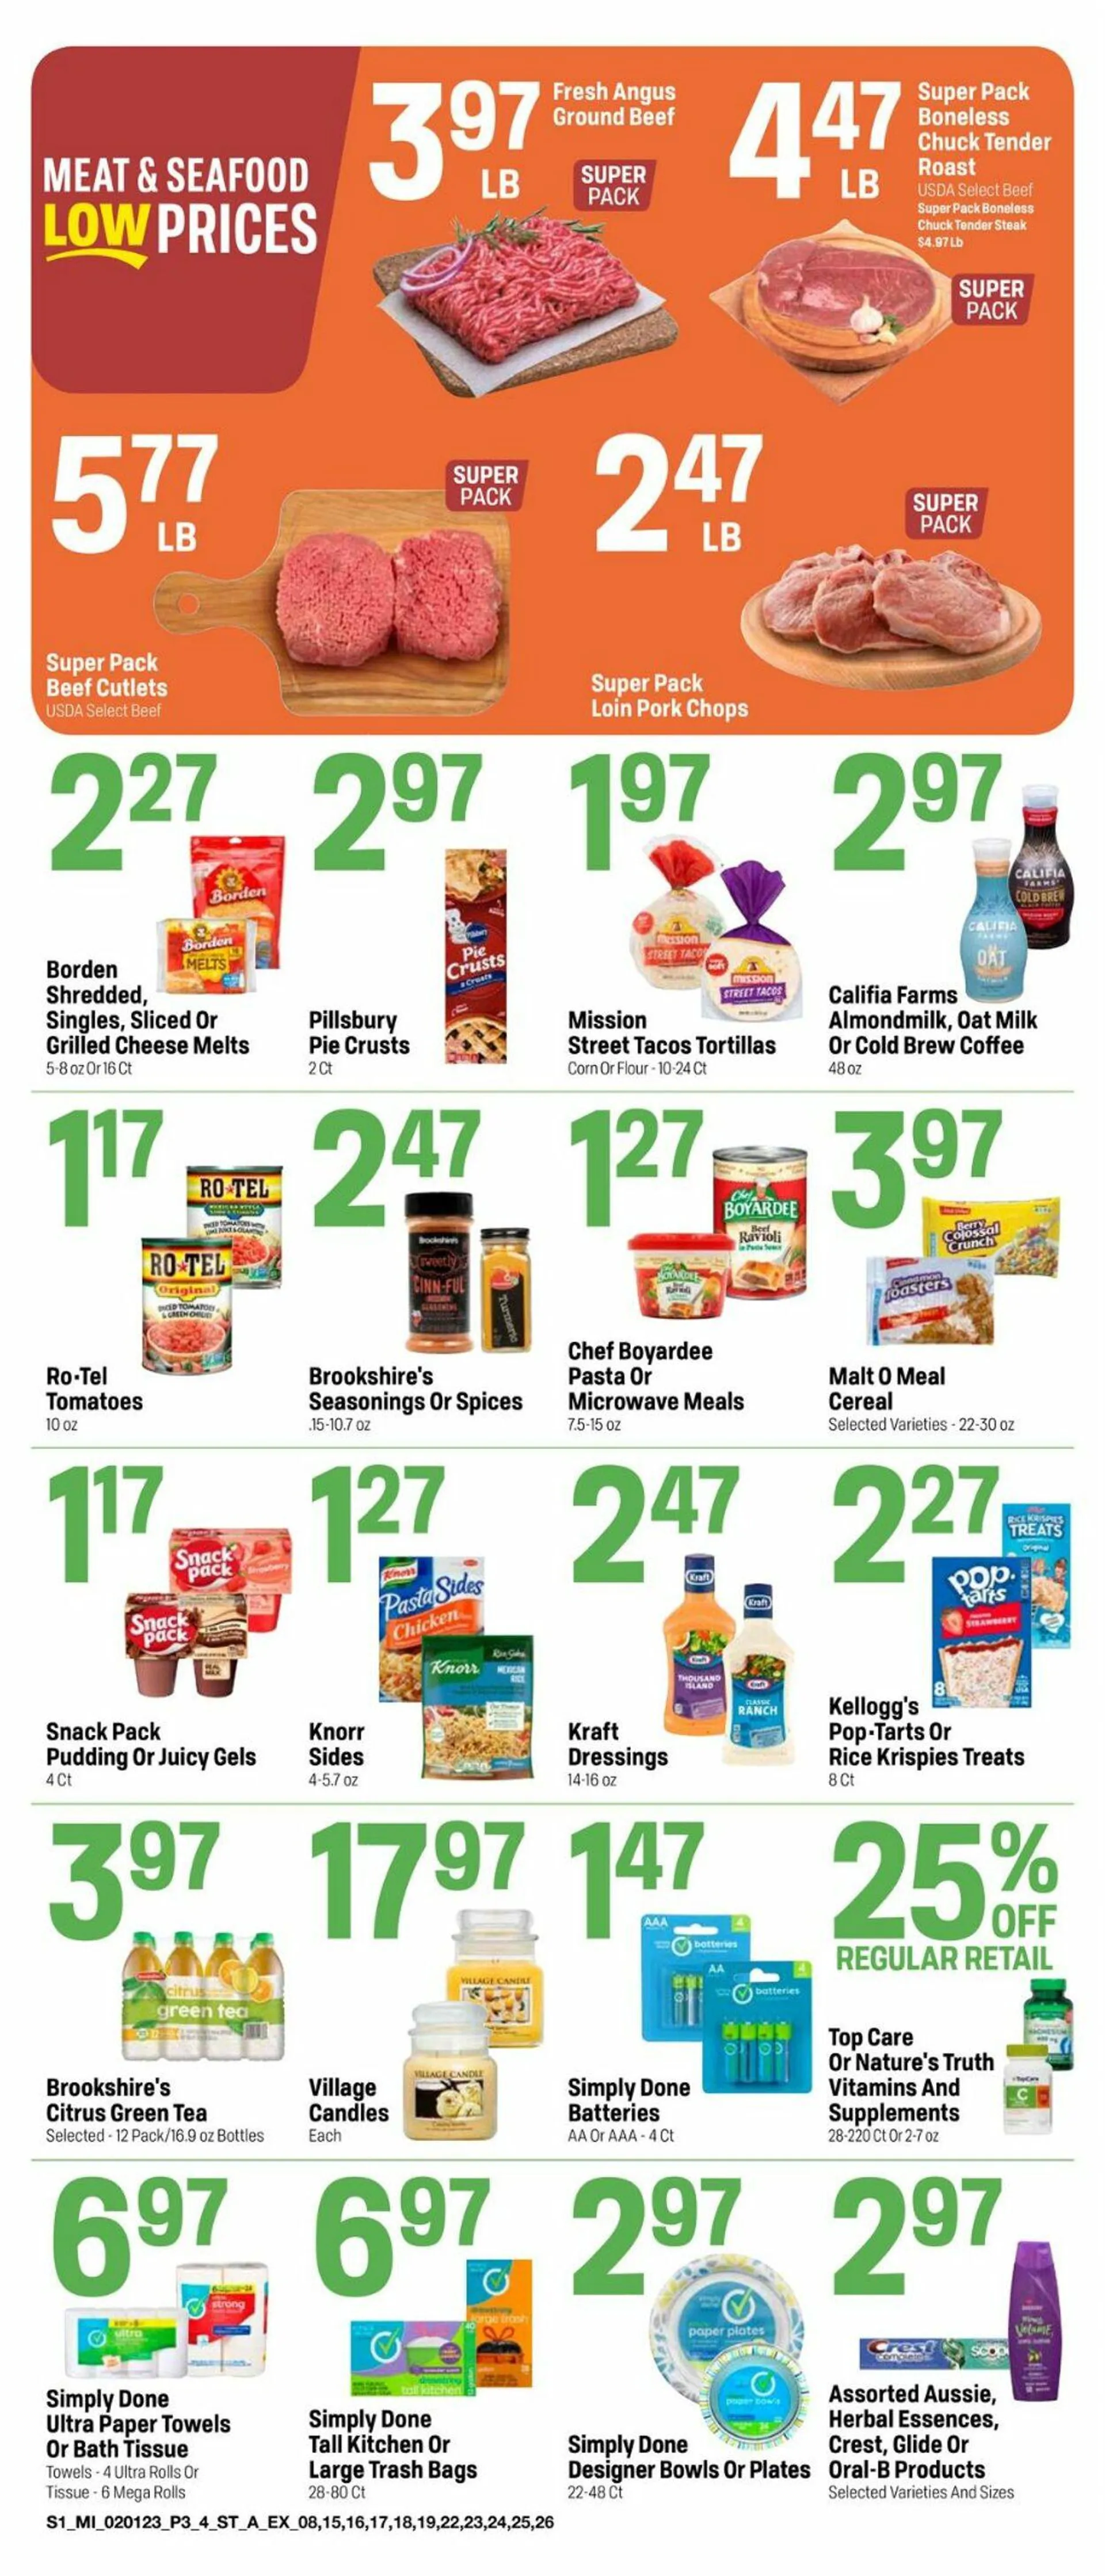 Super 1 Foods Current weekly ad - 3